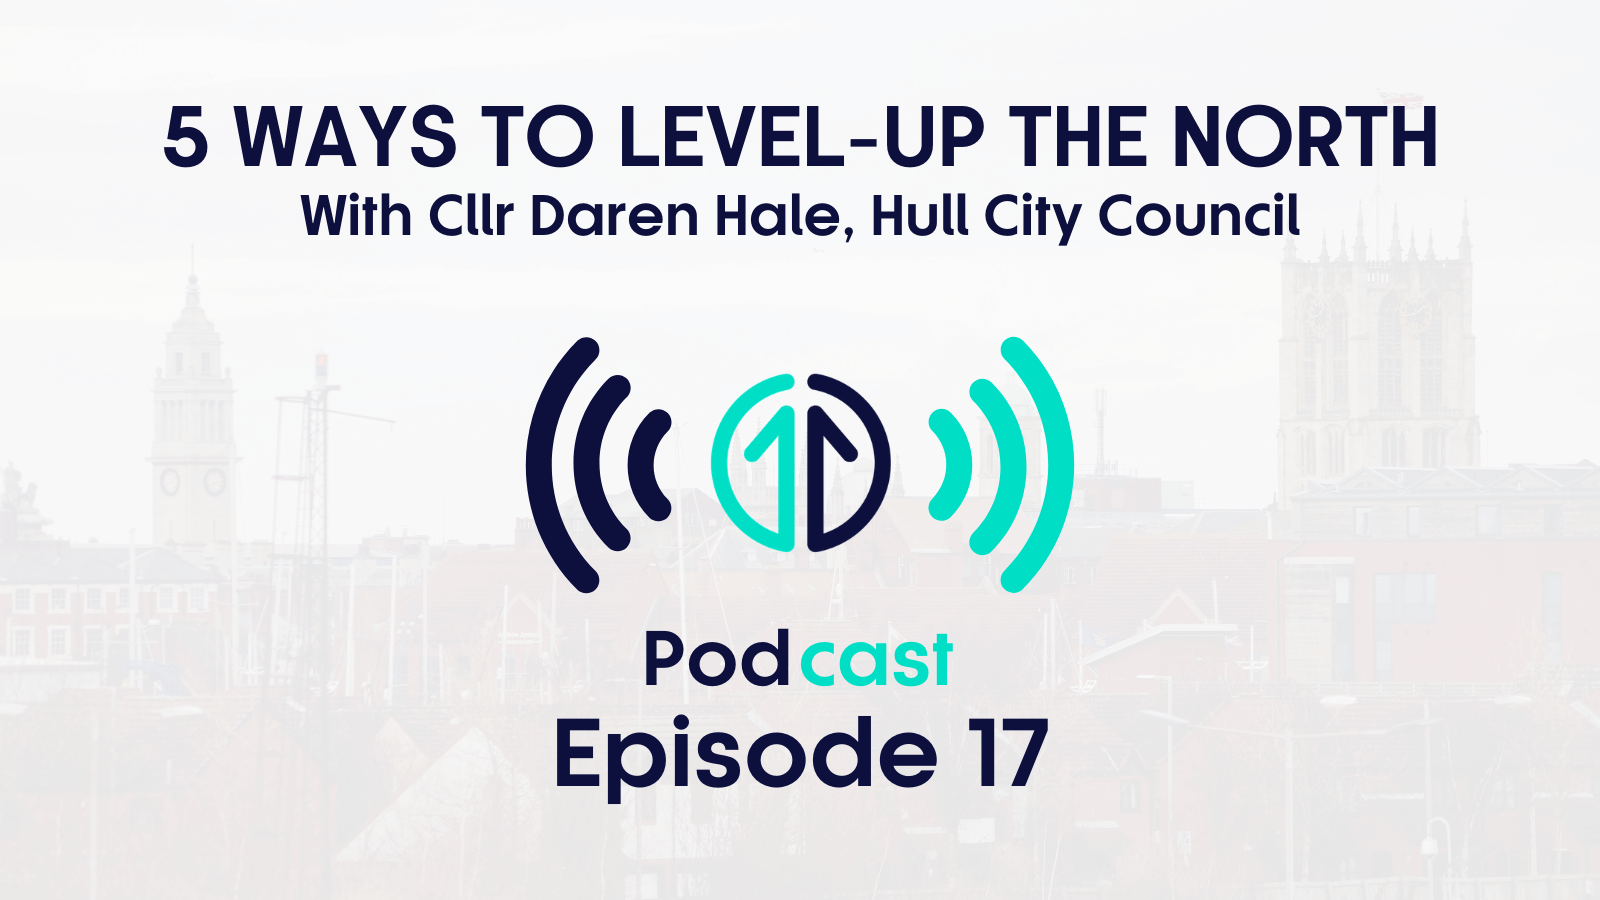 5 ways to level up the North with Cllr Daren Hale, Hull City Council | Episode 17